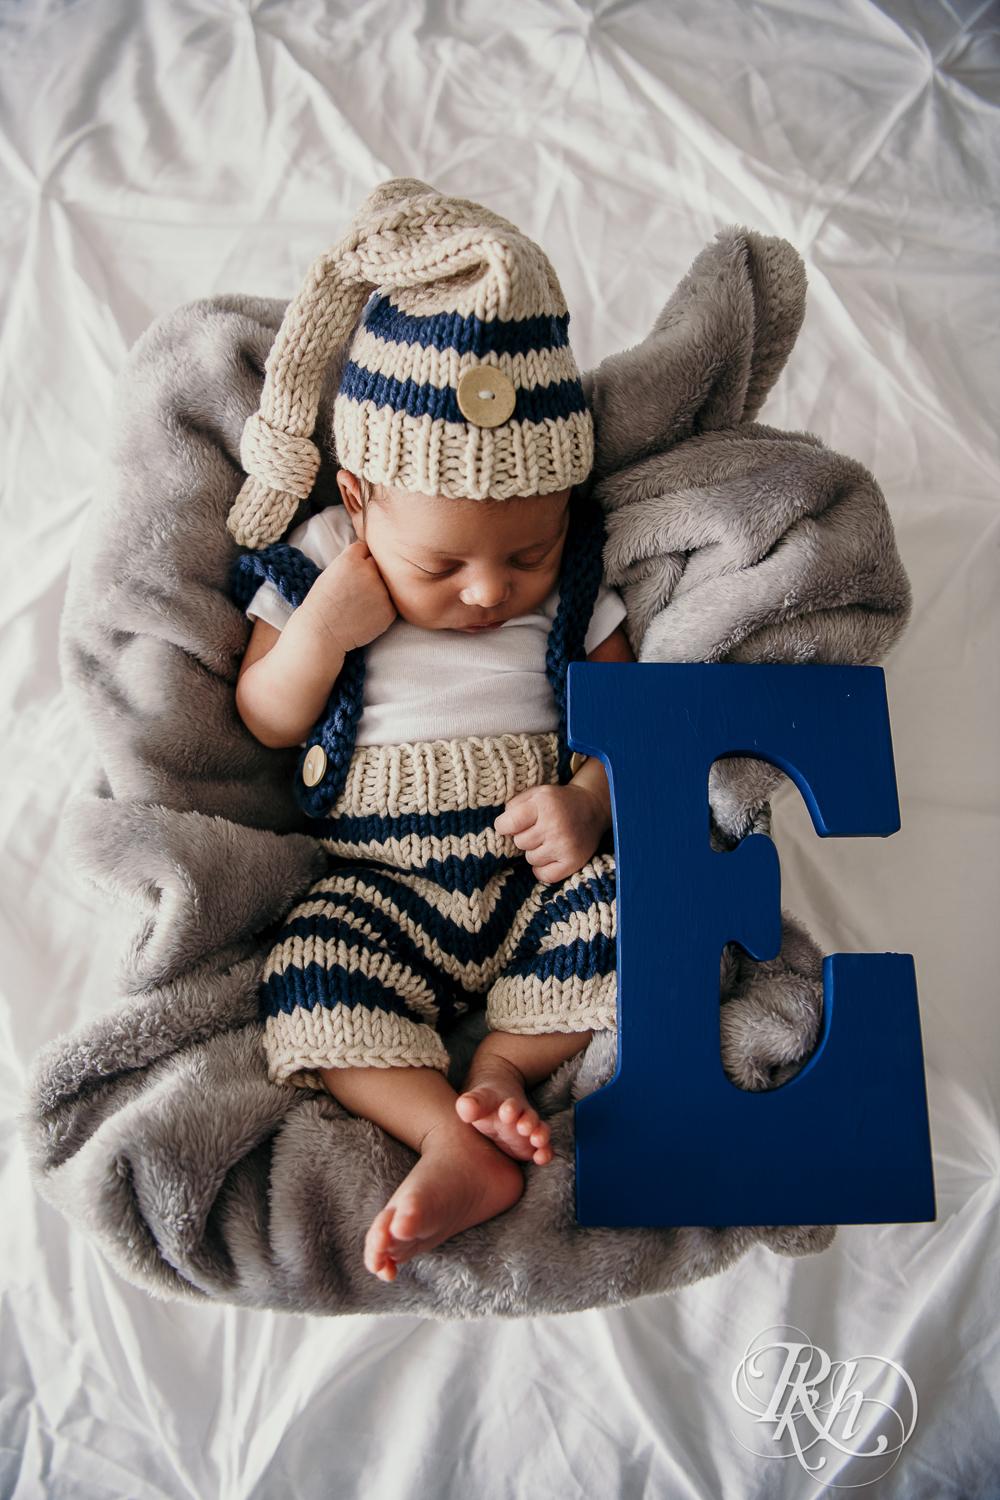 Biracial baby wearing knit cap sleeps on a bed in Burnsville, Minnesota at home with big letter E.